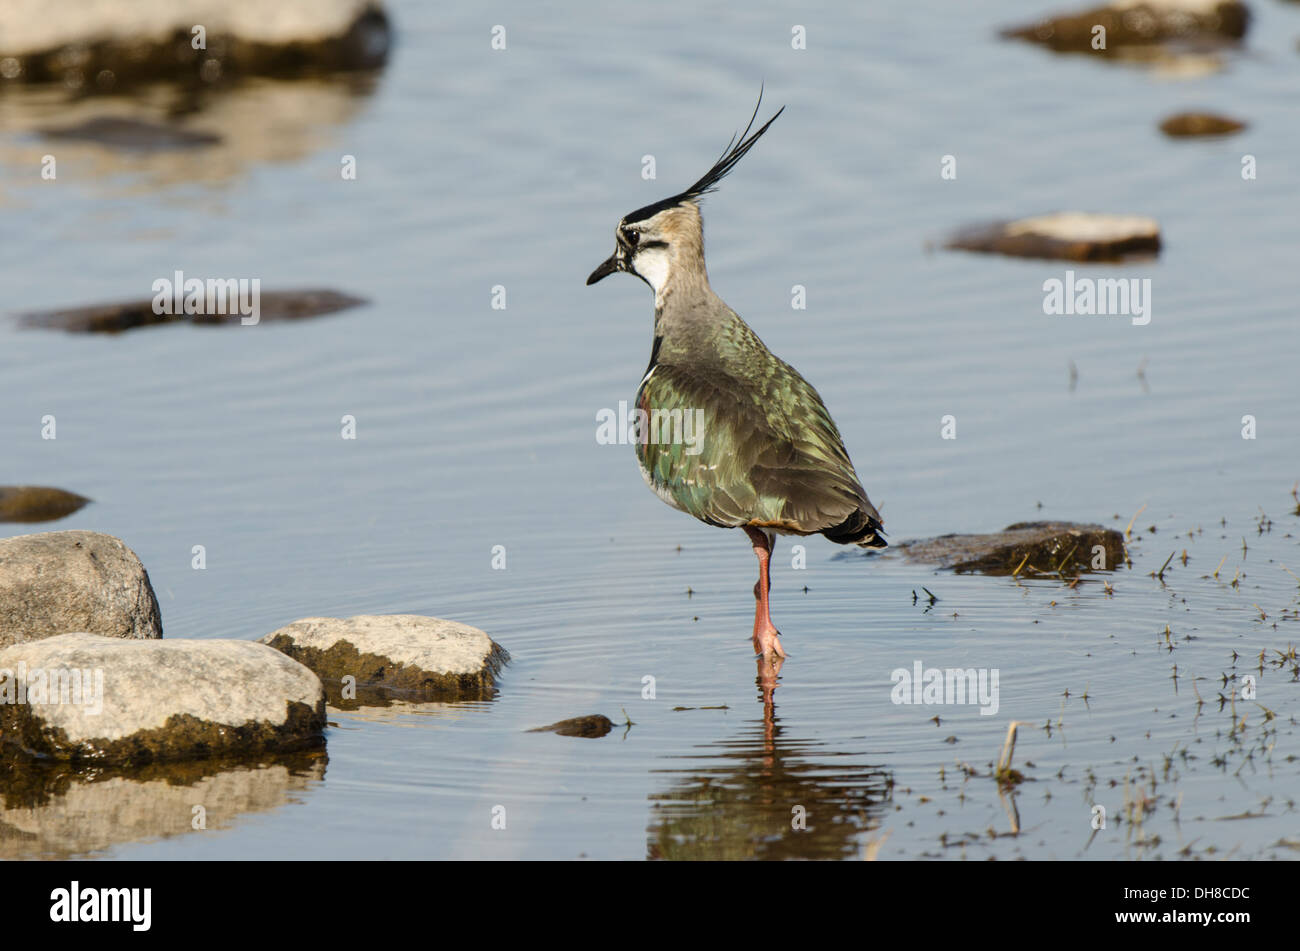 Adult wading in Loch. Stock Photo